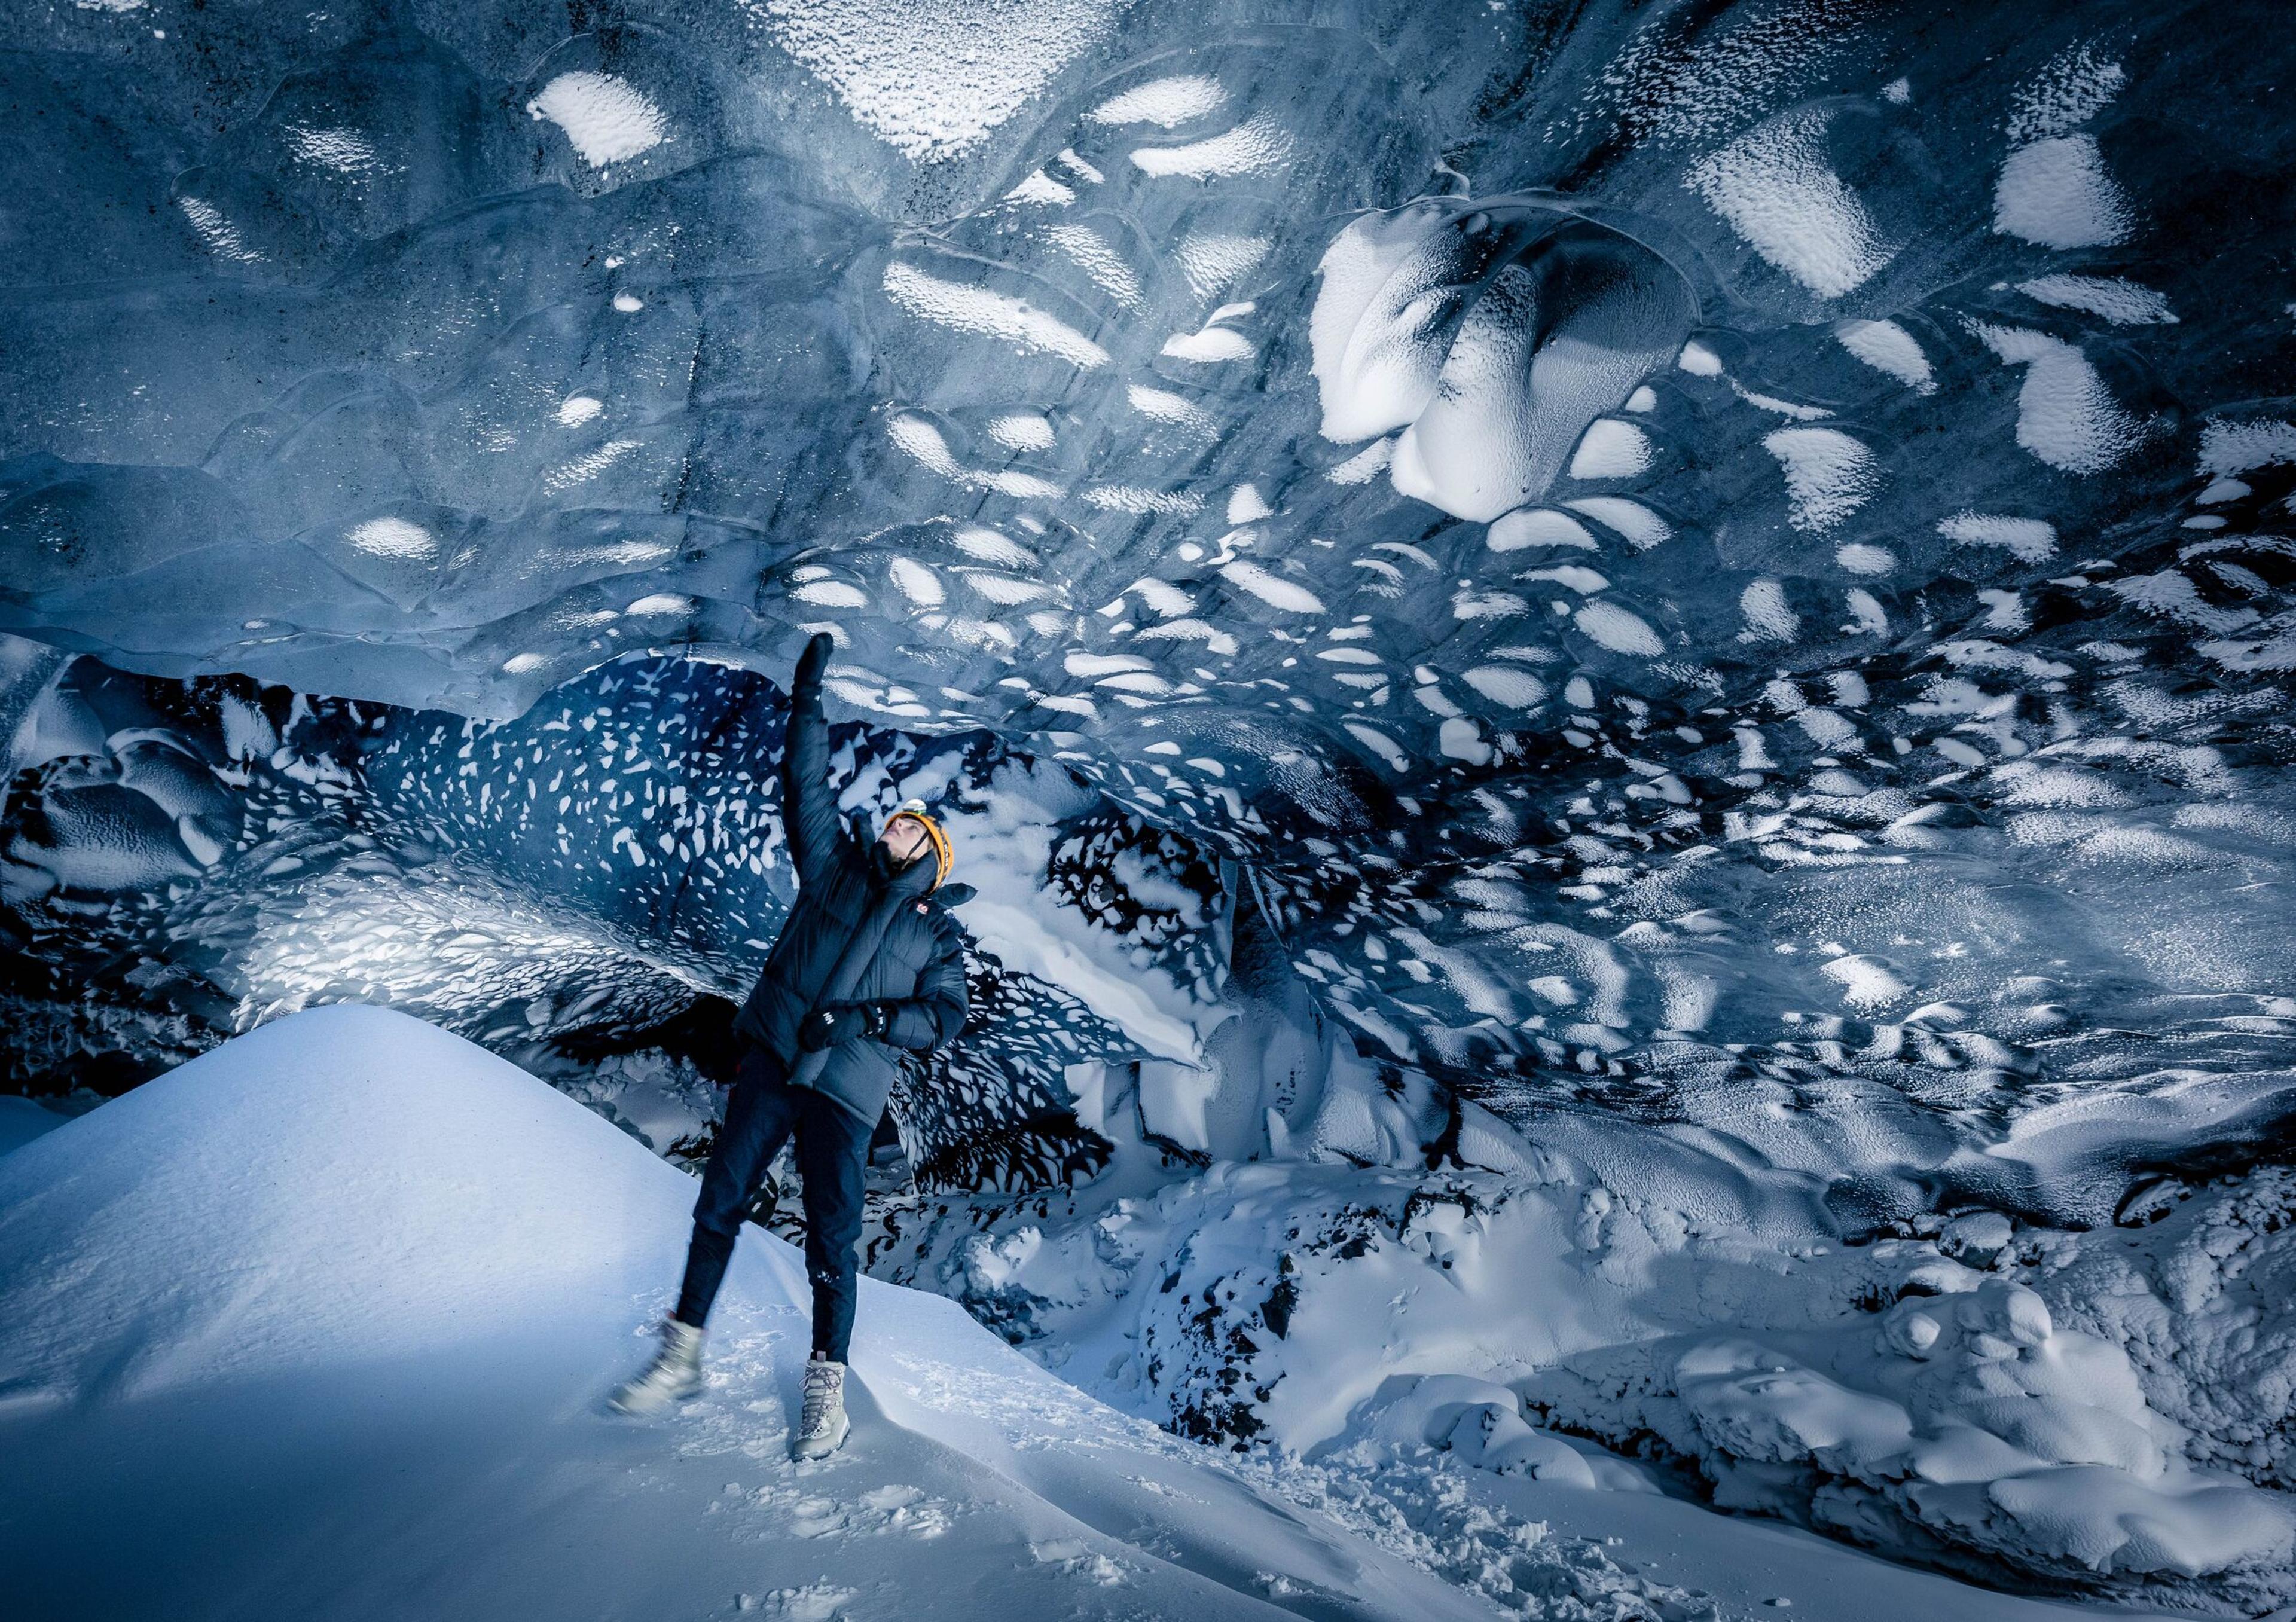 A person with raised arms stands at the entrance of a magnificent ice cave, expressing a sense of triumph or awe. The cave's interior is a frozen wonderland, with snow-covered formations that create an otherworldly landscape.